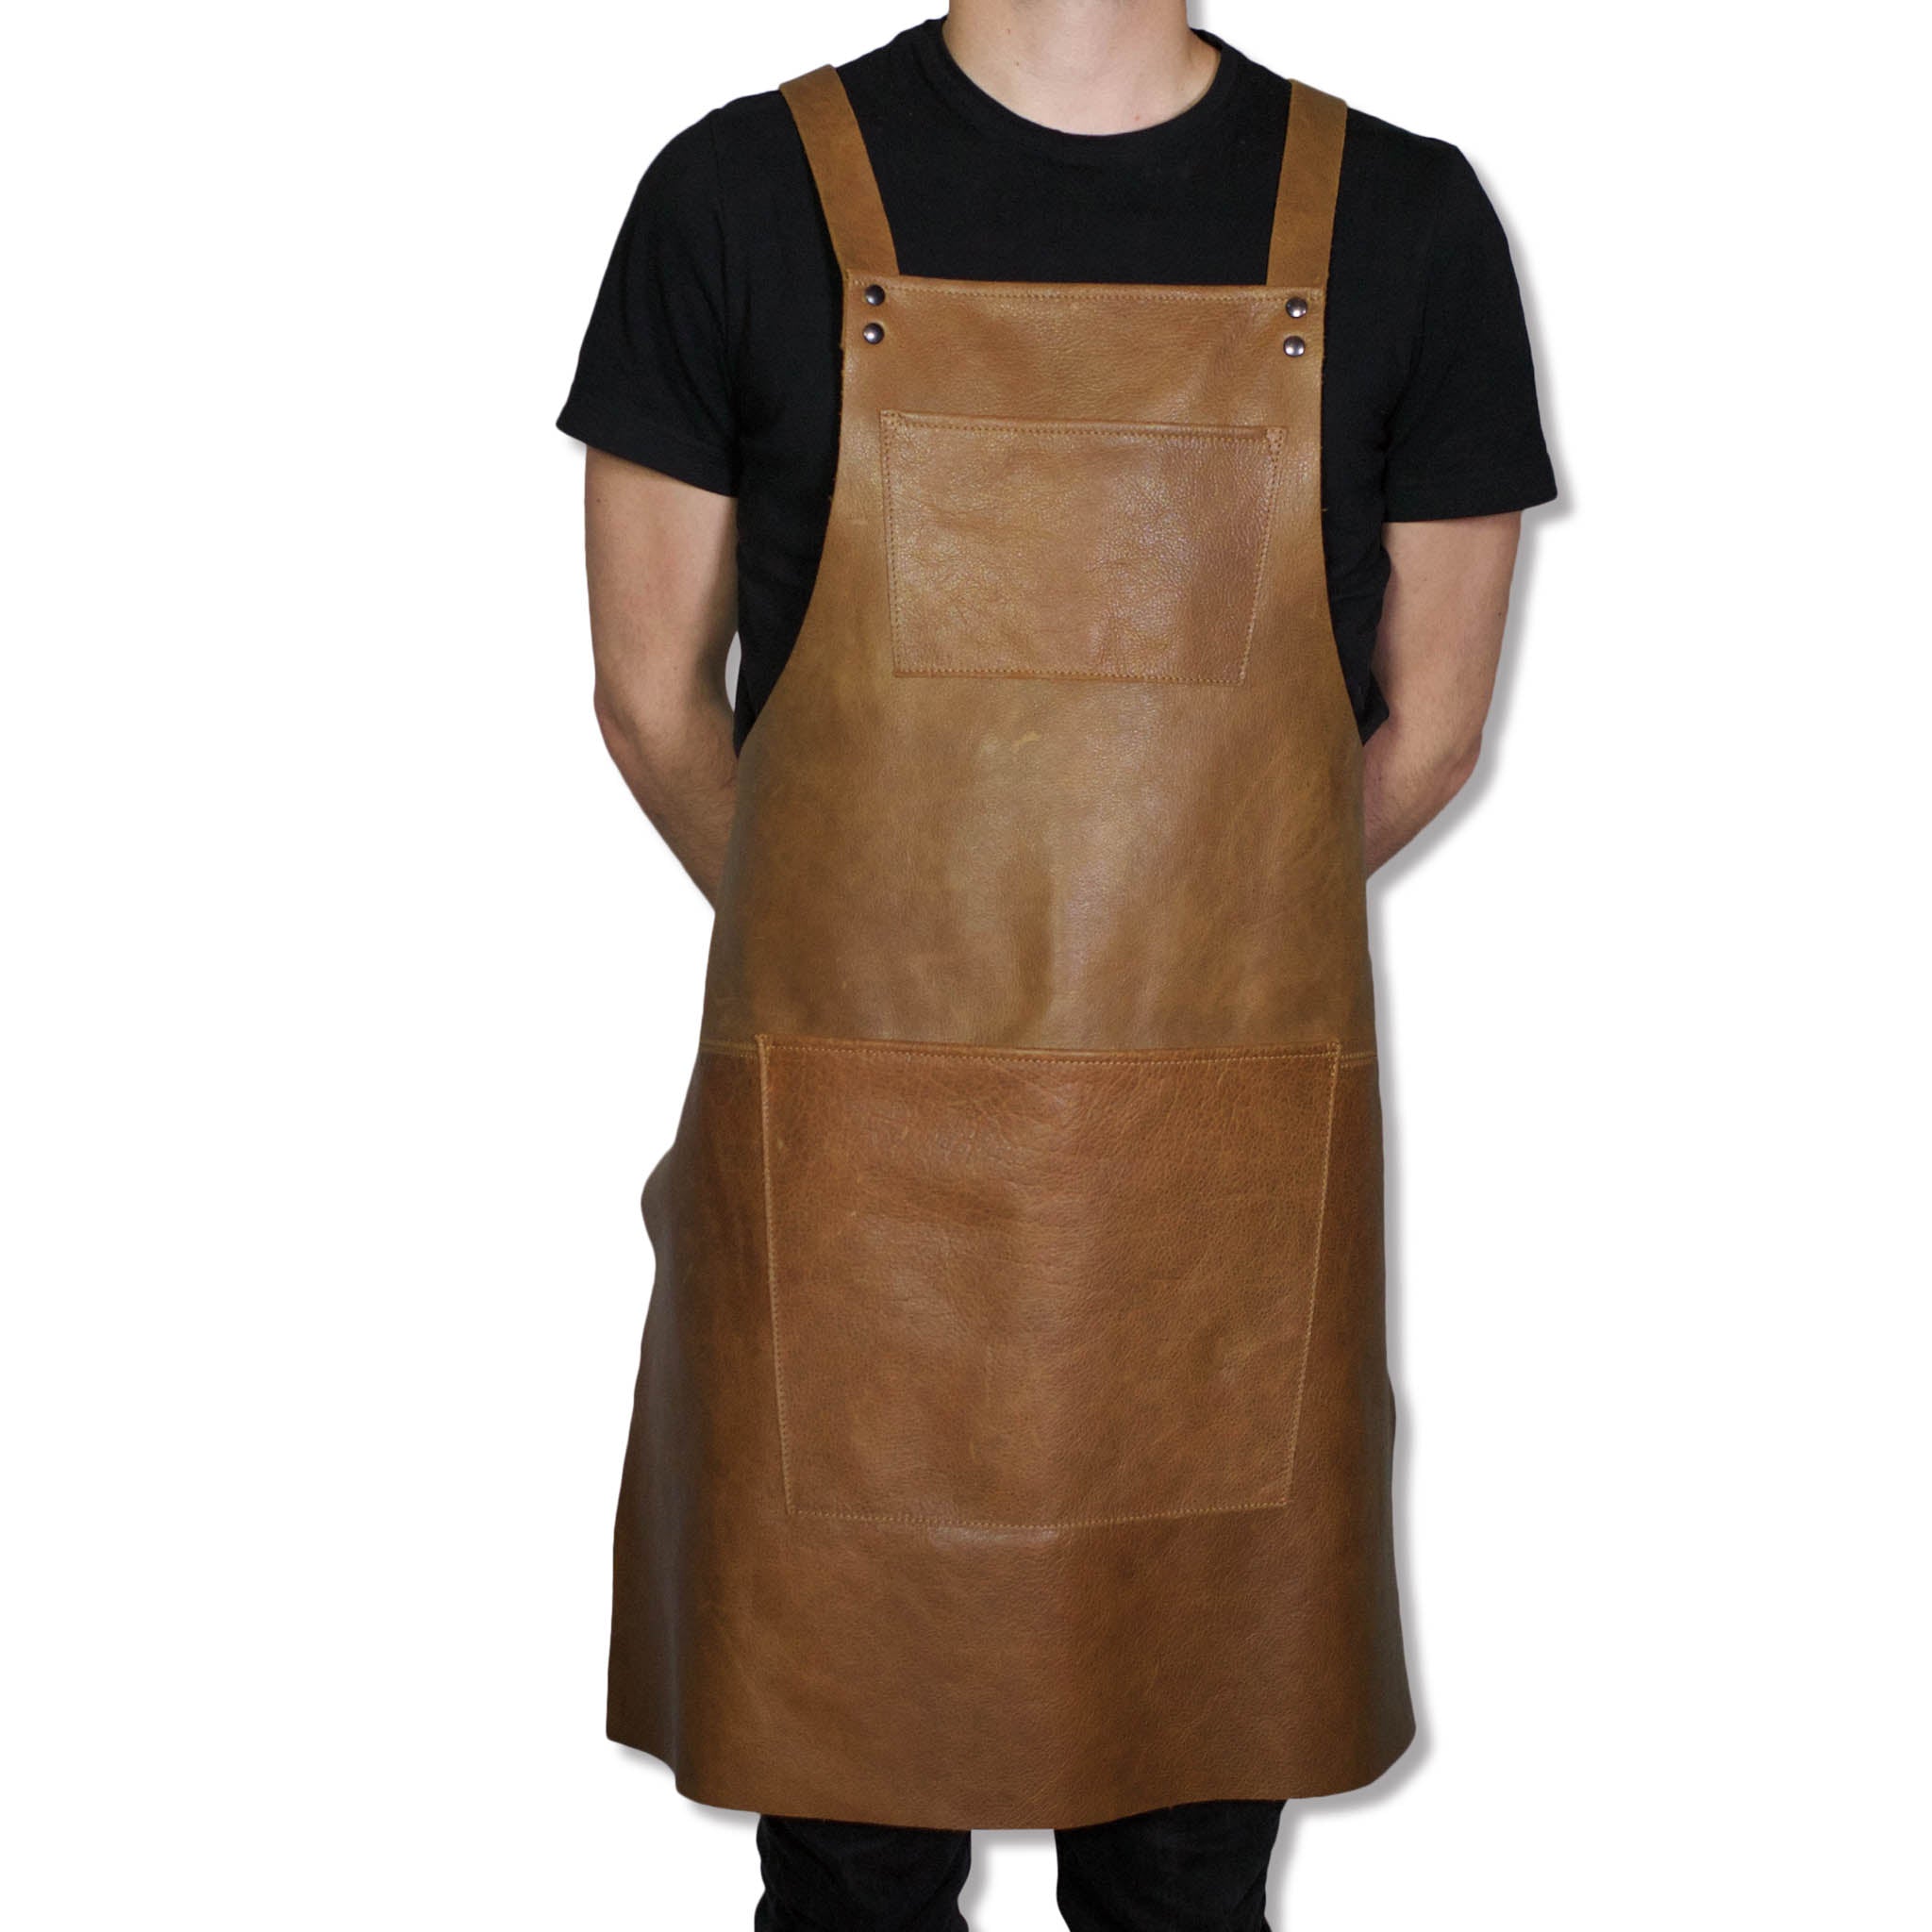 Dutchdeluxes Leather Suspender Apron in Vintage Camel Cookware Kitchen Clothing